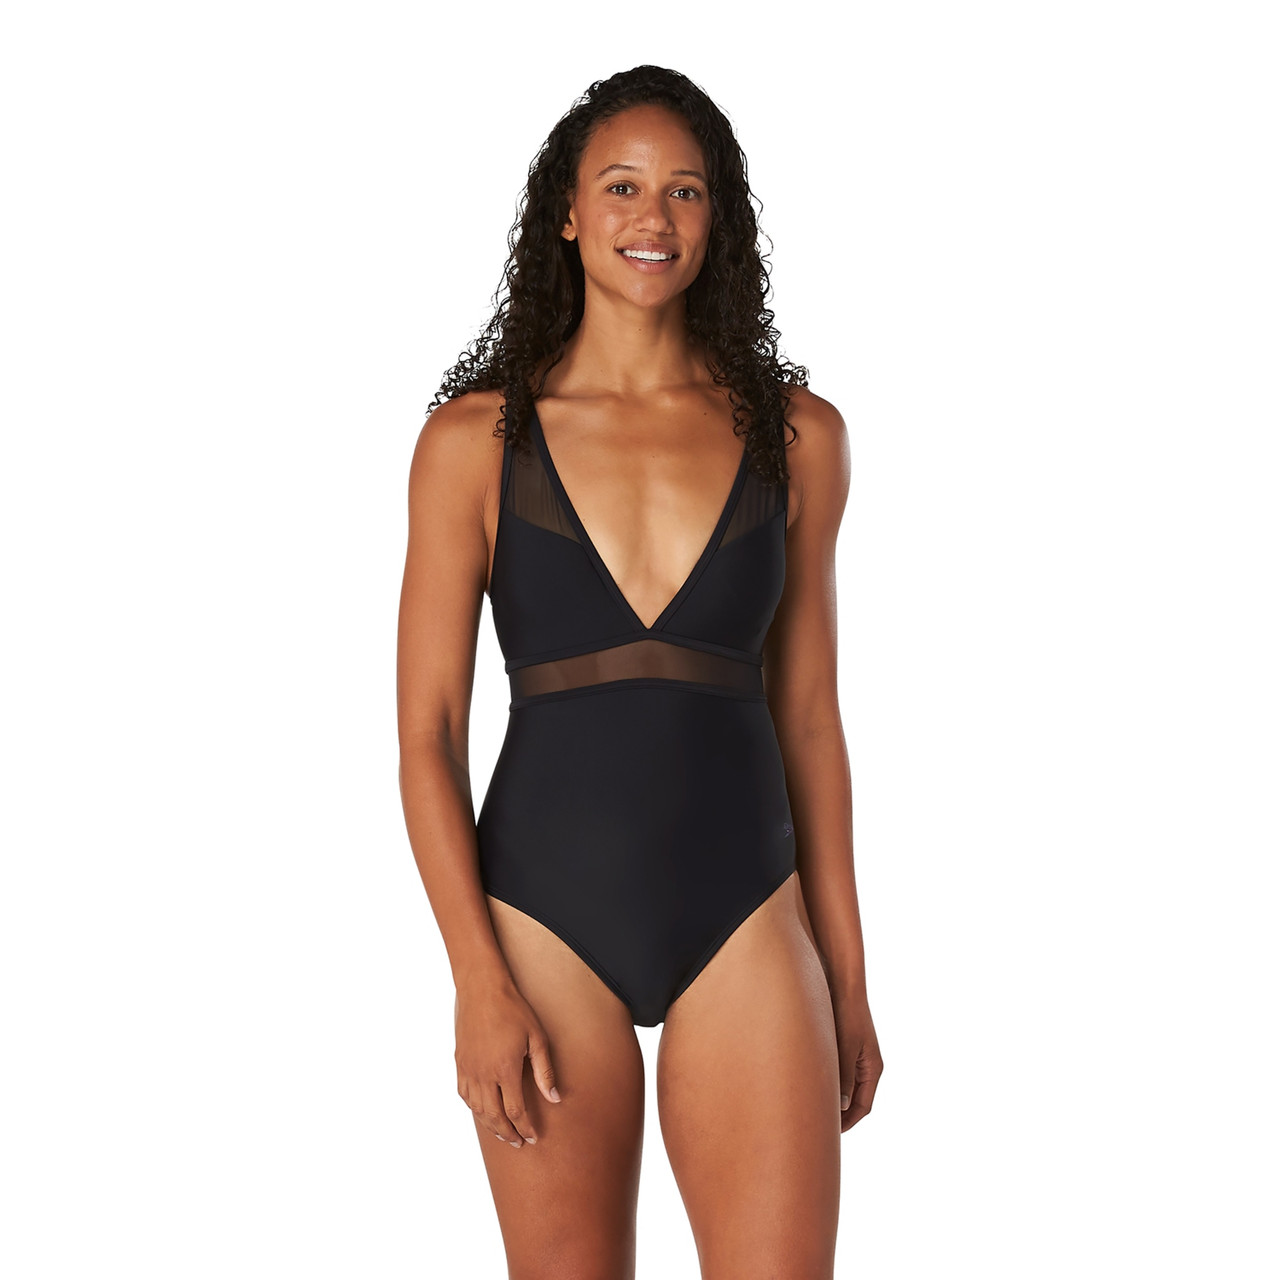 Black One-Piece Swimsuit With Mesh Sides by Flash You And Me